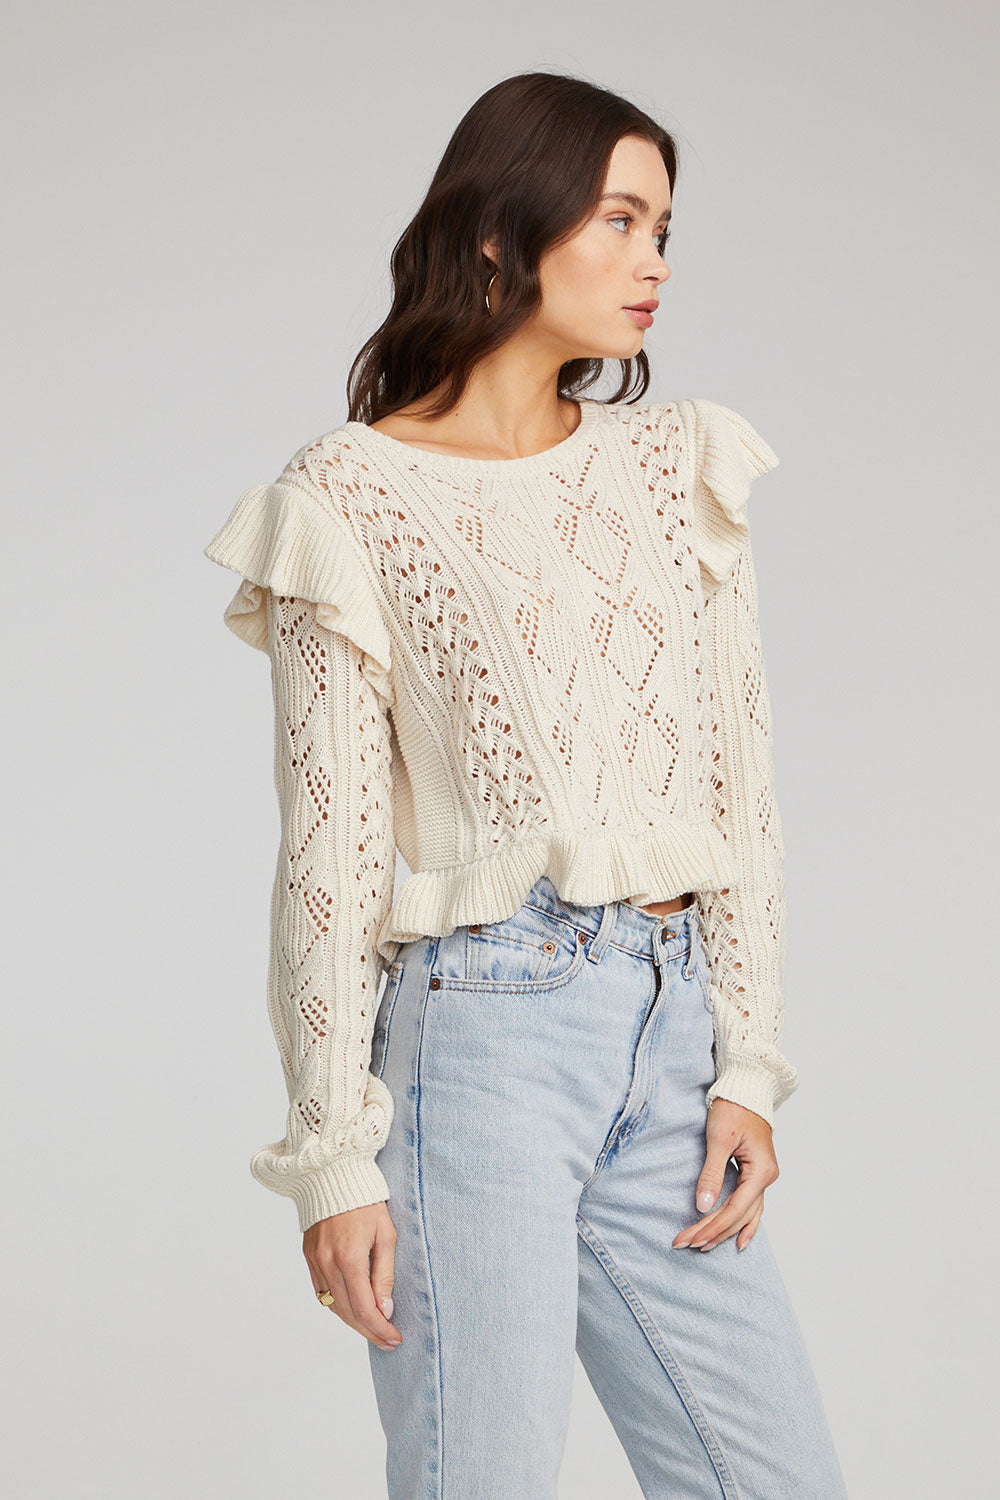 Saltwater Luxe Crochet Knit Sweater with Ruffles - Size S Available